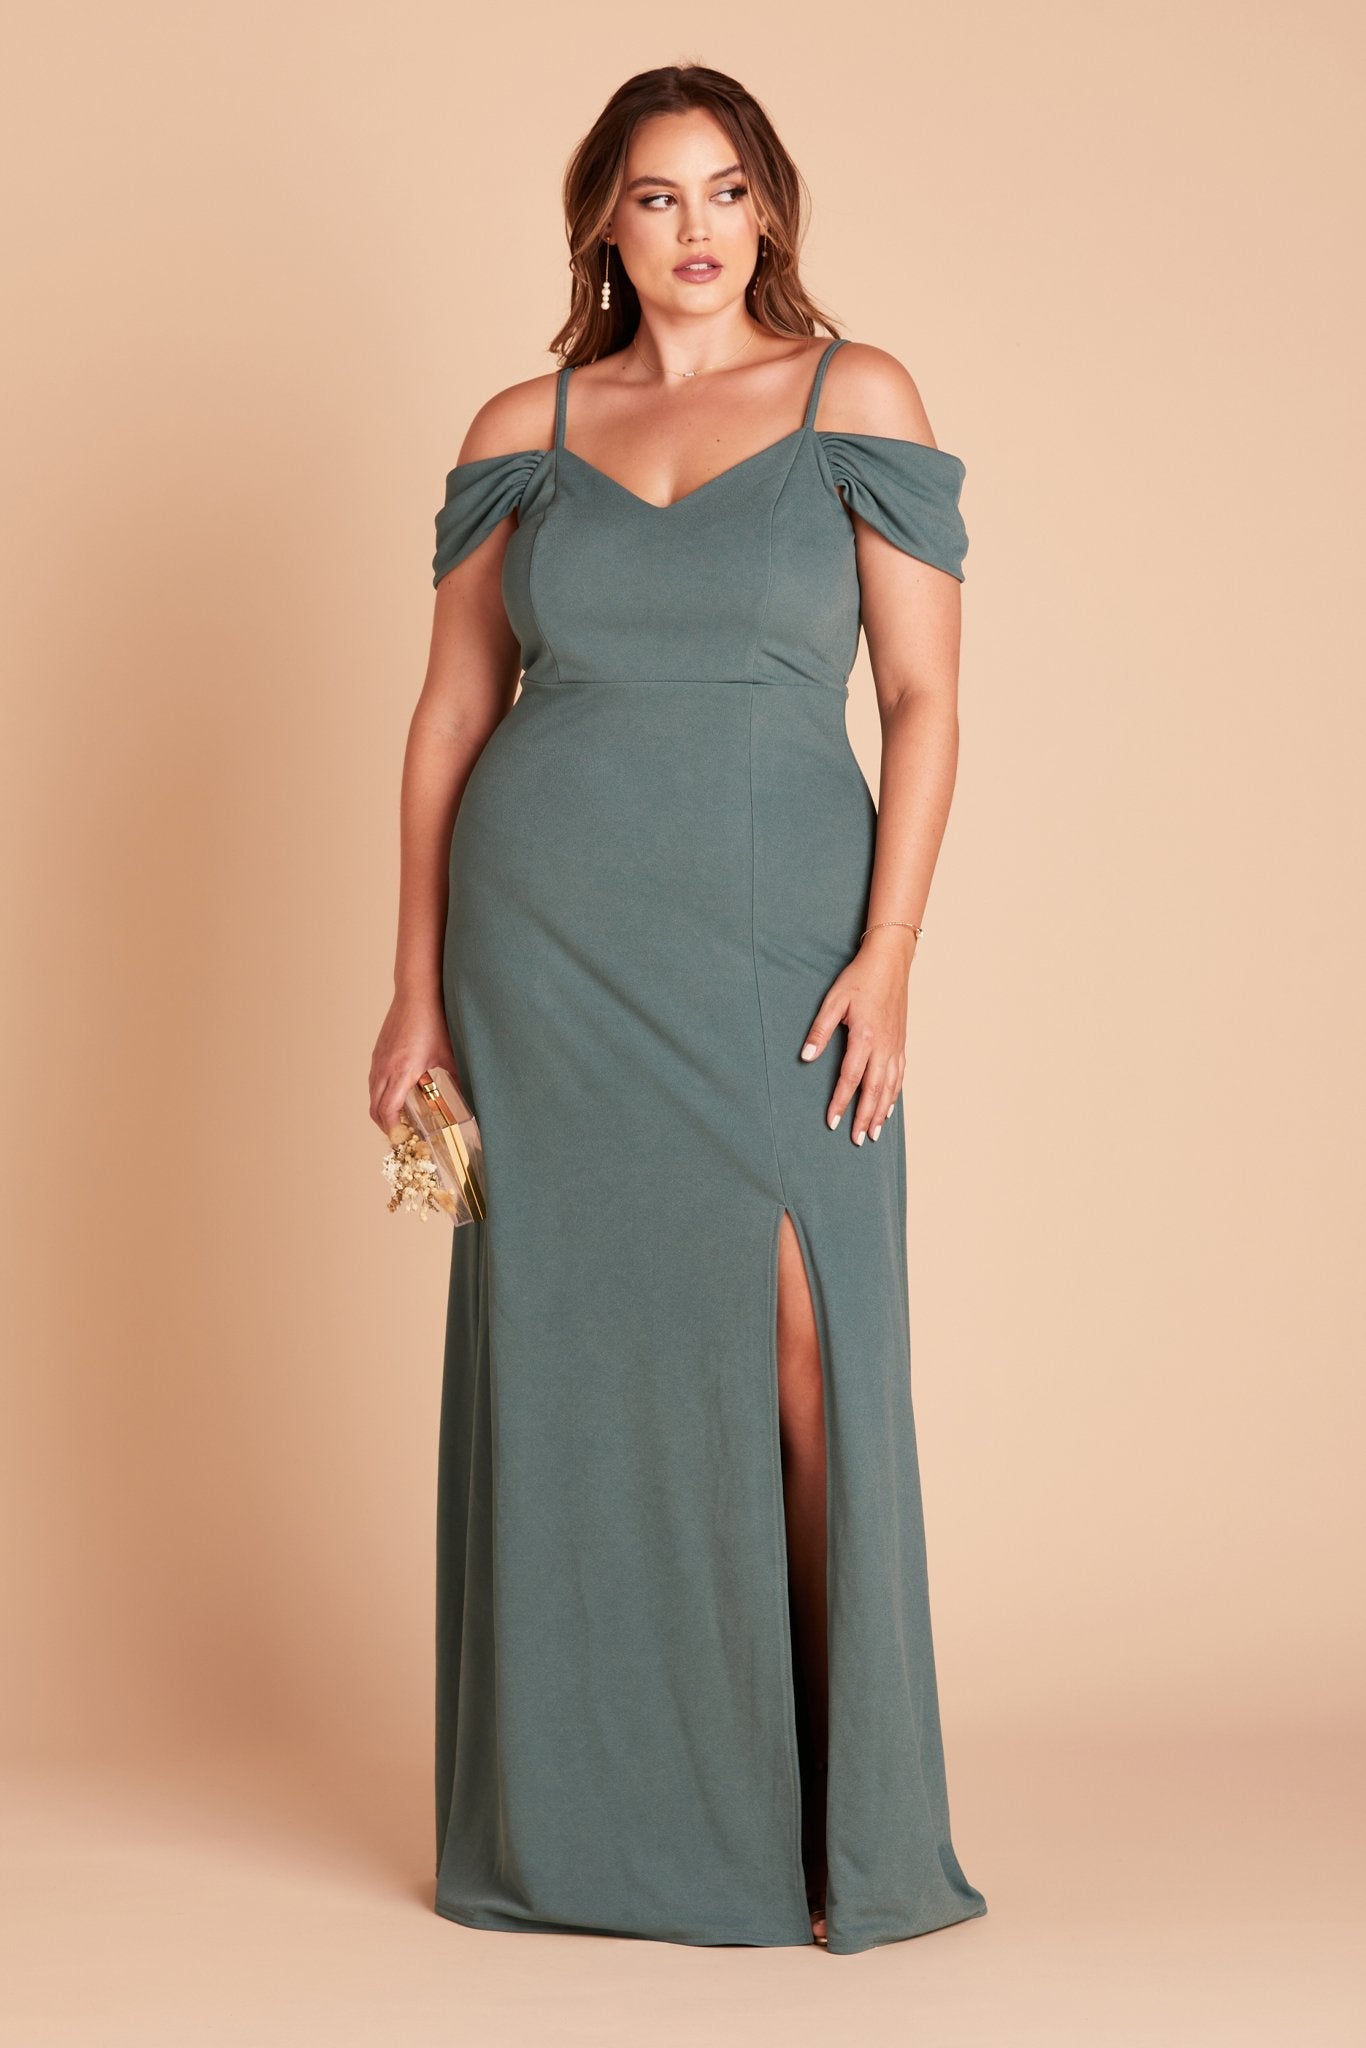 Dev plus size bridesmaid dress with slit in sea glass green crepe by Birdy Grey, front view